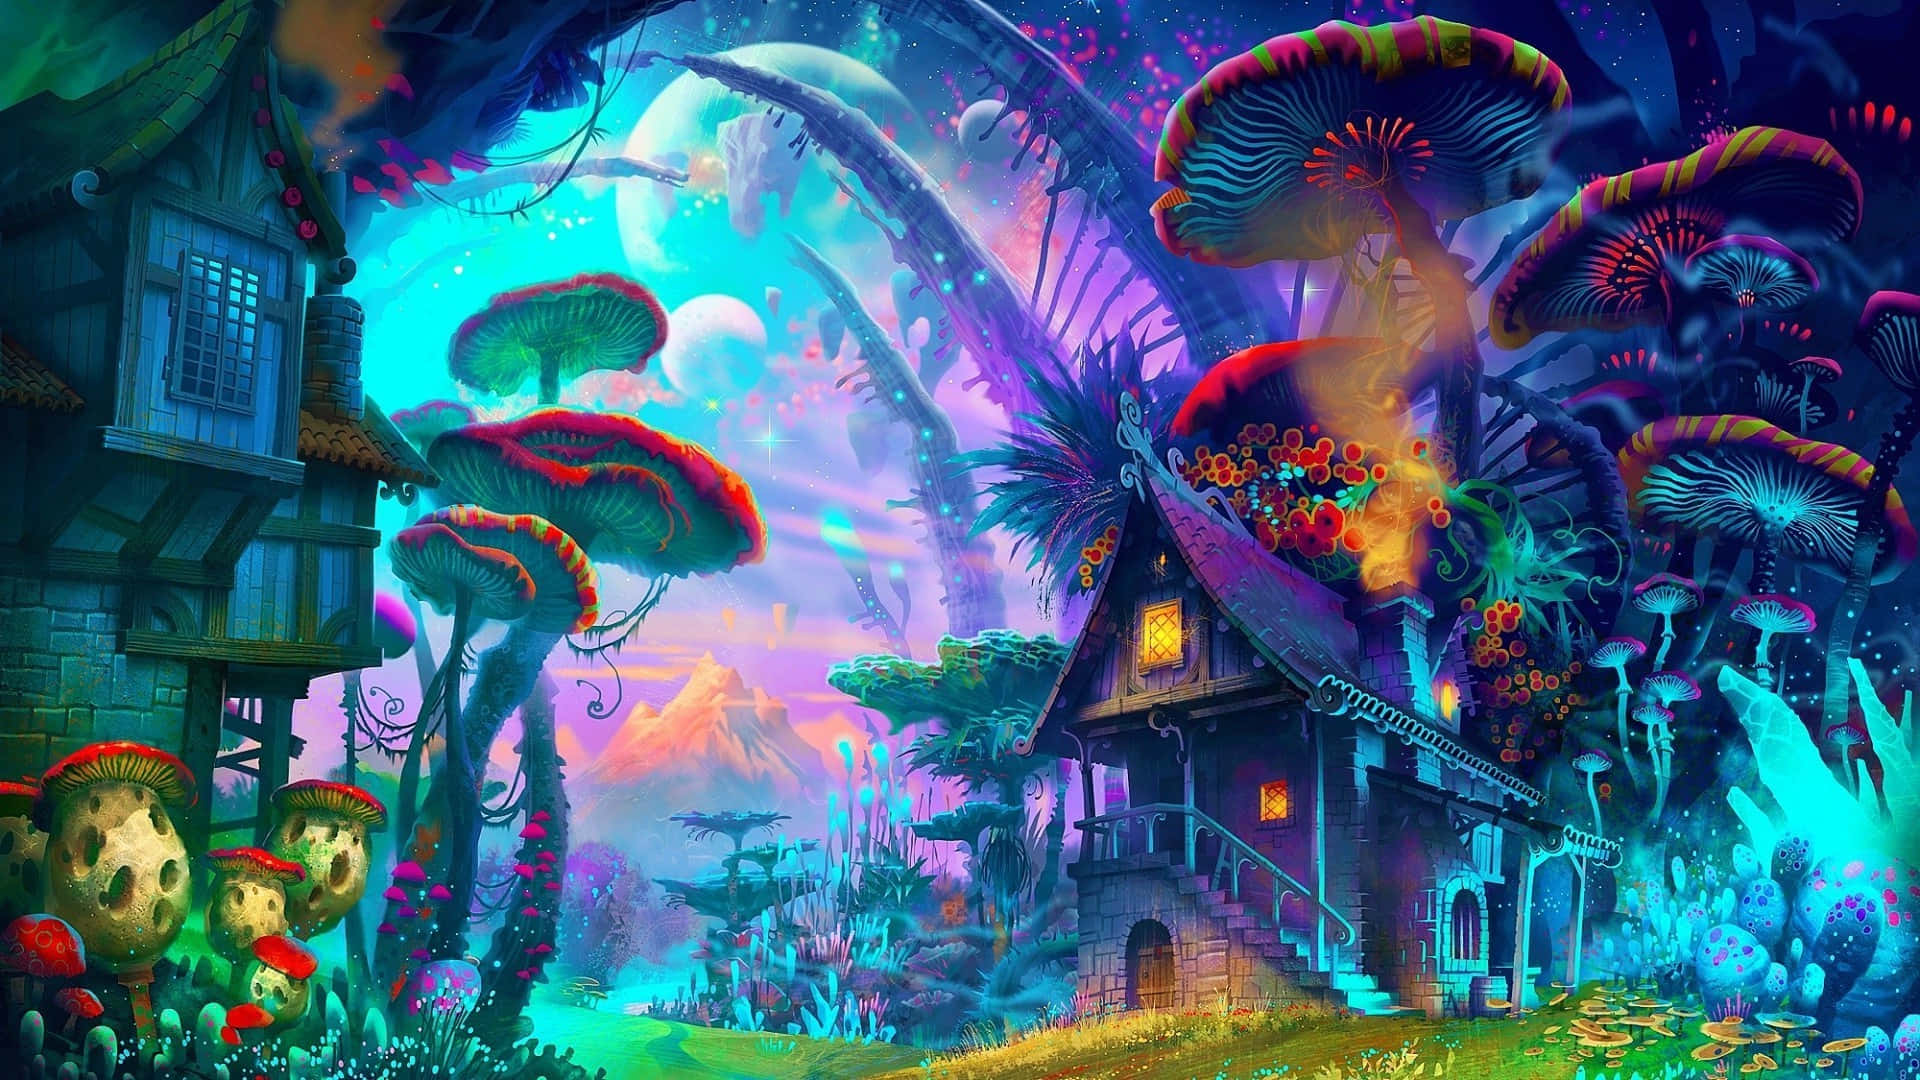 "Transform your reality with psychedelic art"